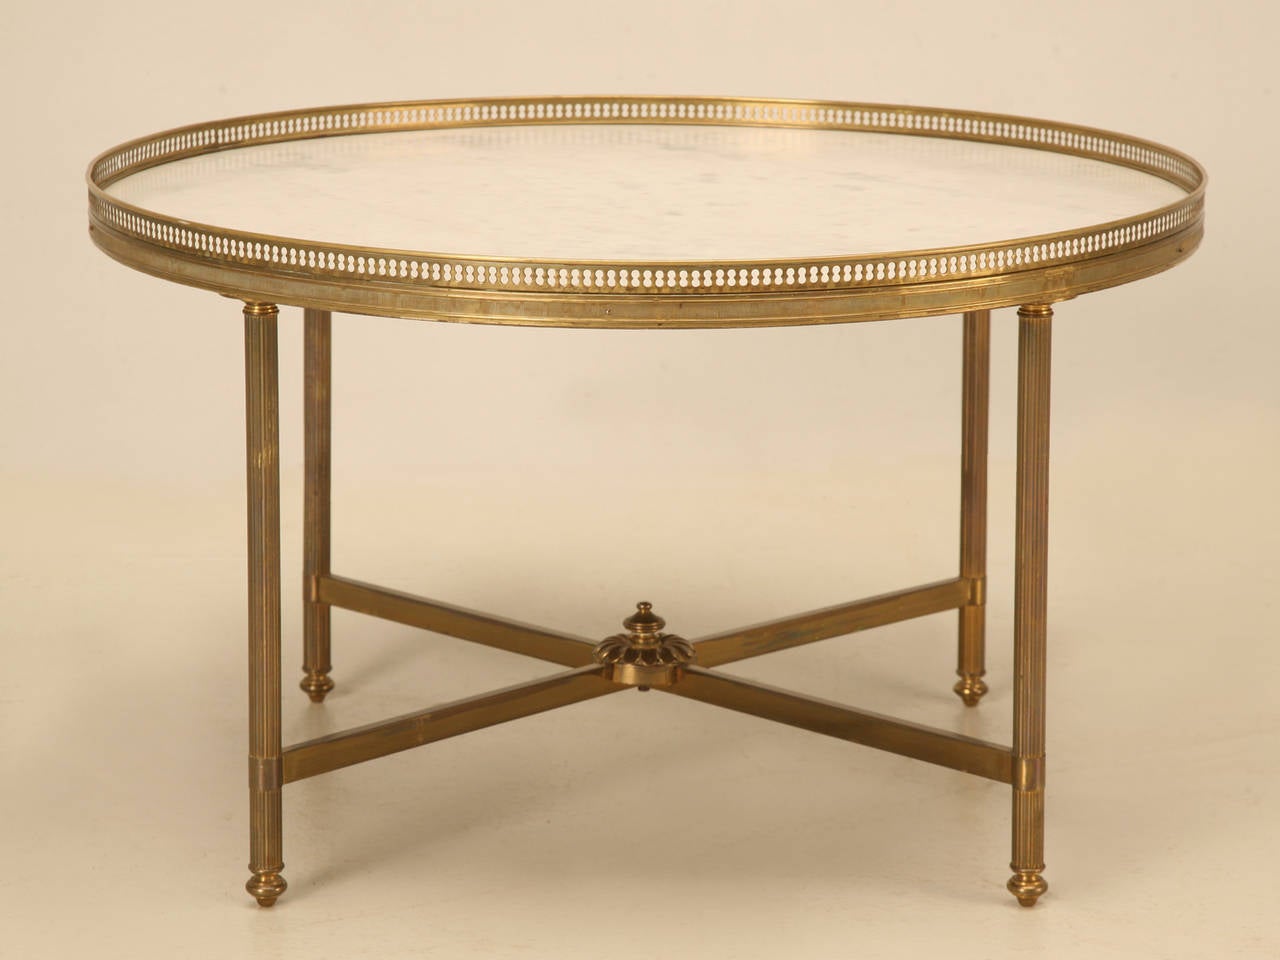 20th Century Vintage French Marble and Brass Cocktail or Coffee Table